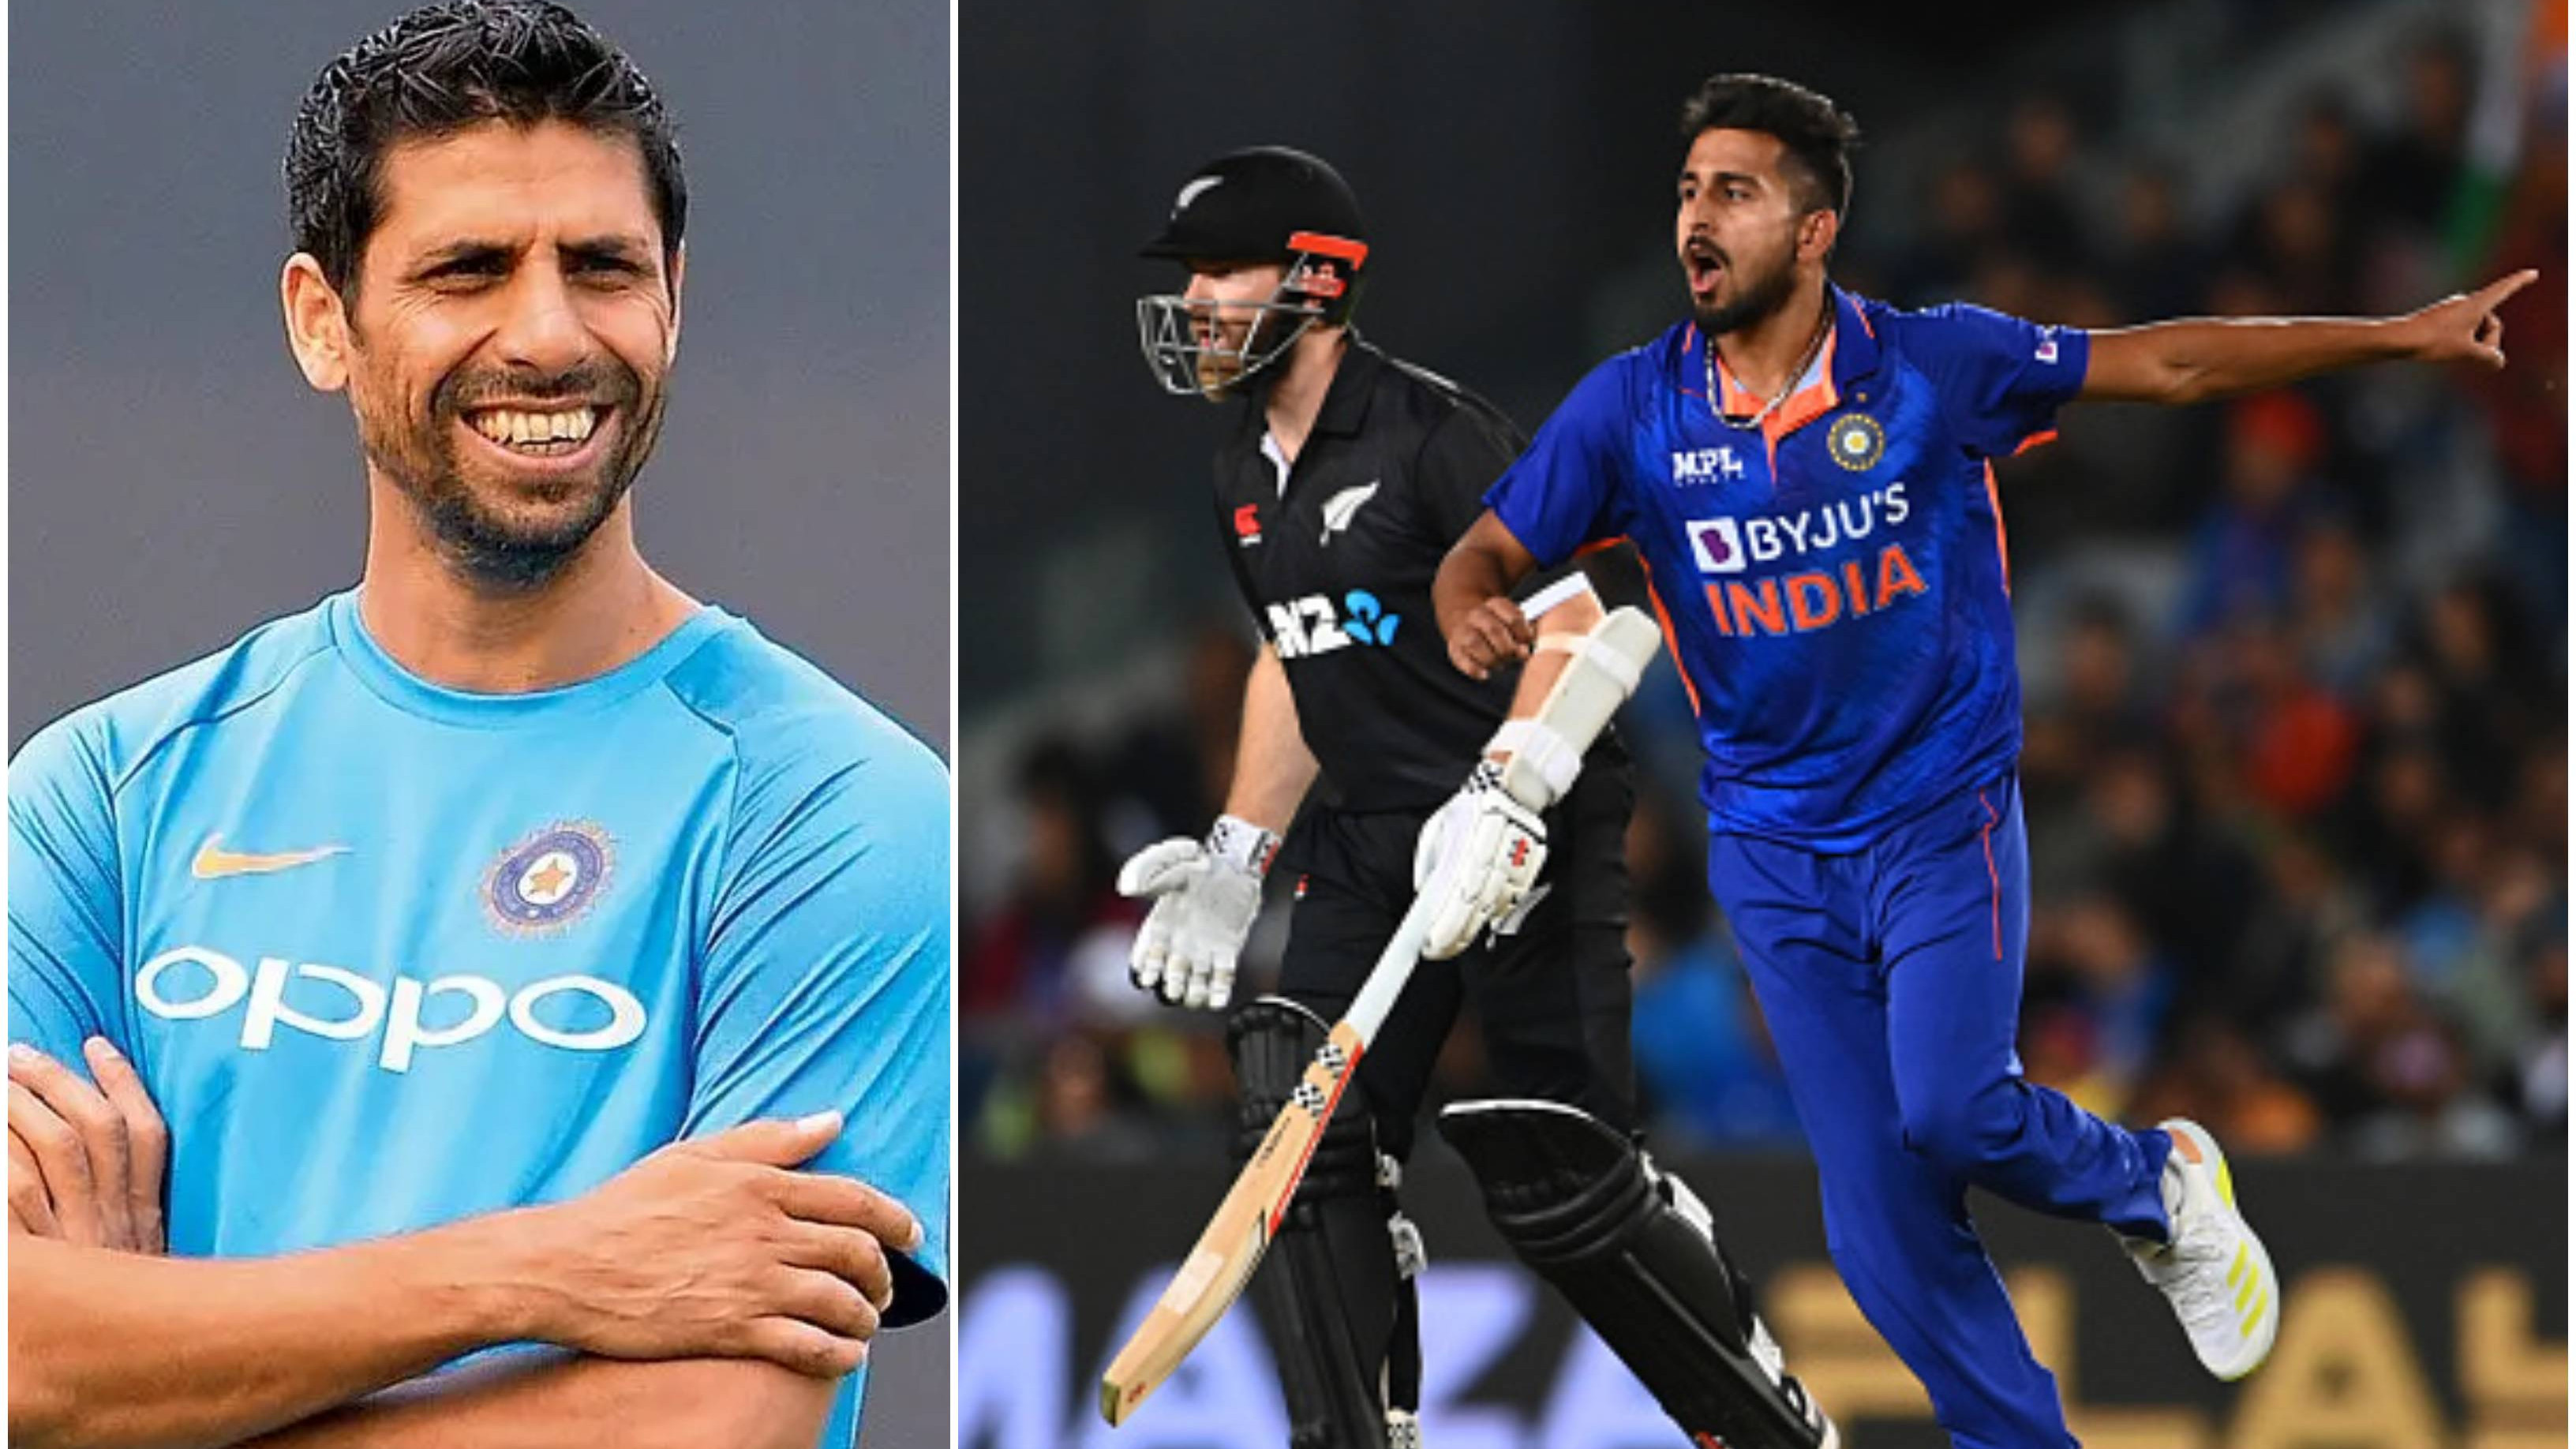 NZ v IND 2022: “Umran Malik not someone only looking to play T20 cricket,” Nehra lauds India's 'shining light' from NZ tour